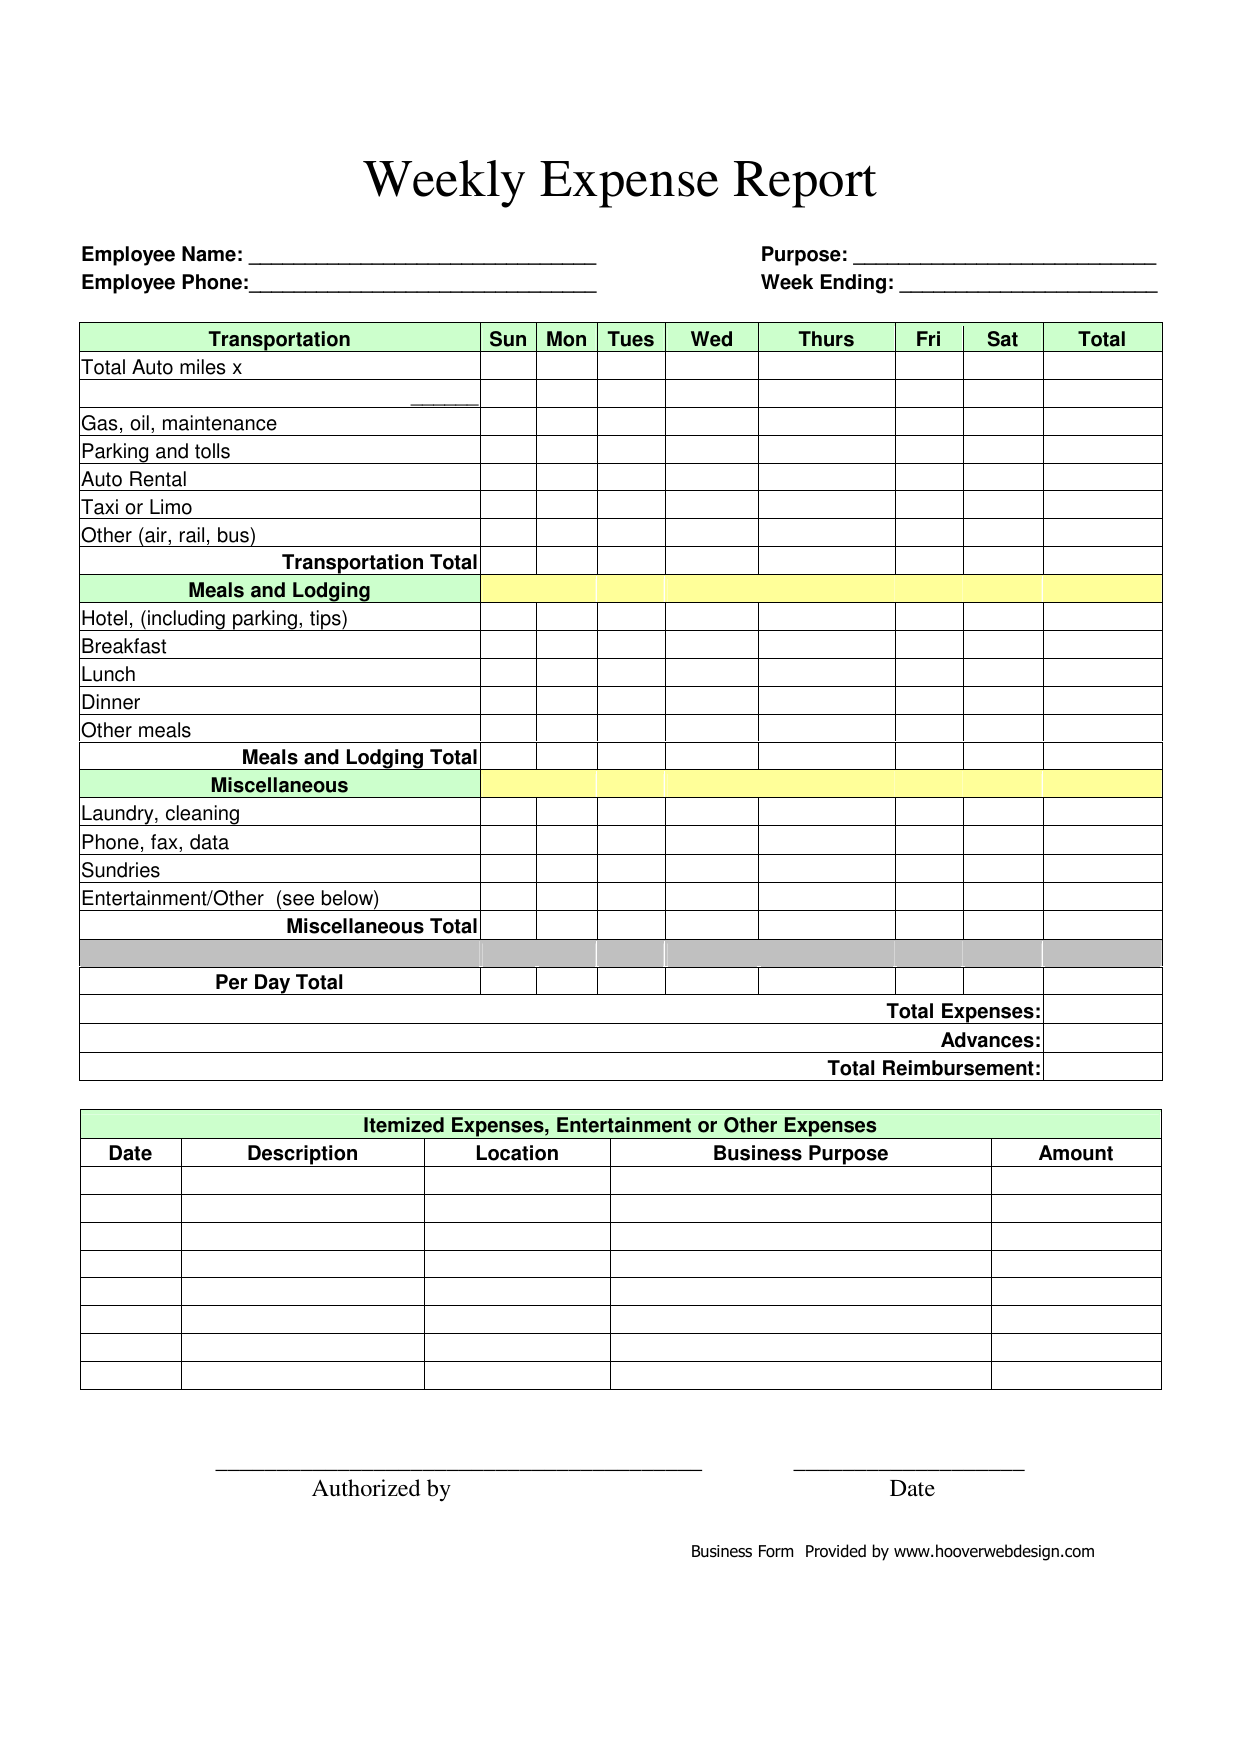 Download Weekly Expense Report Form | PDF | FreeDownloads.net